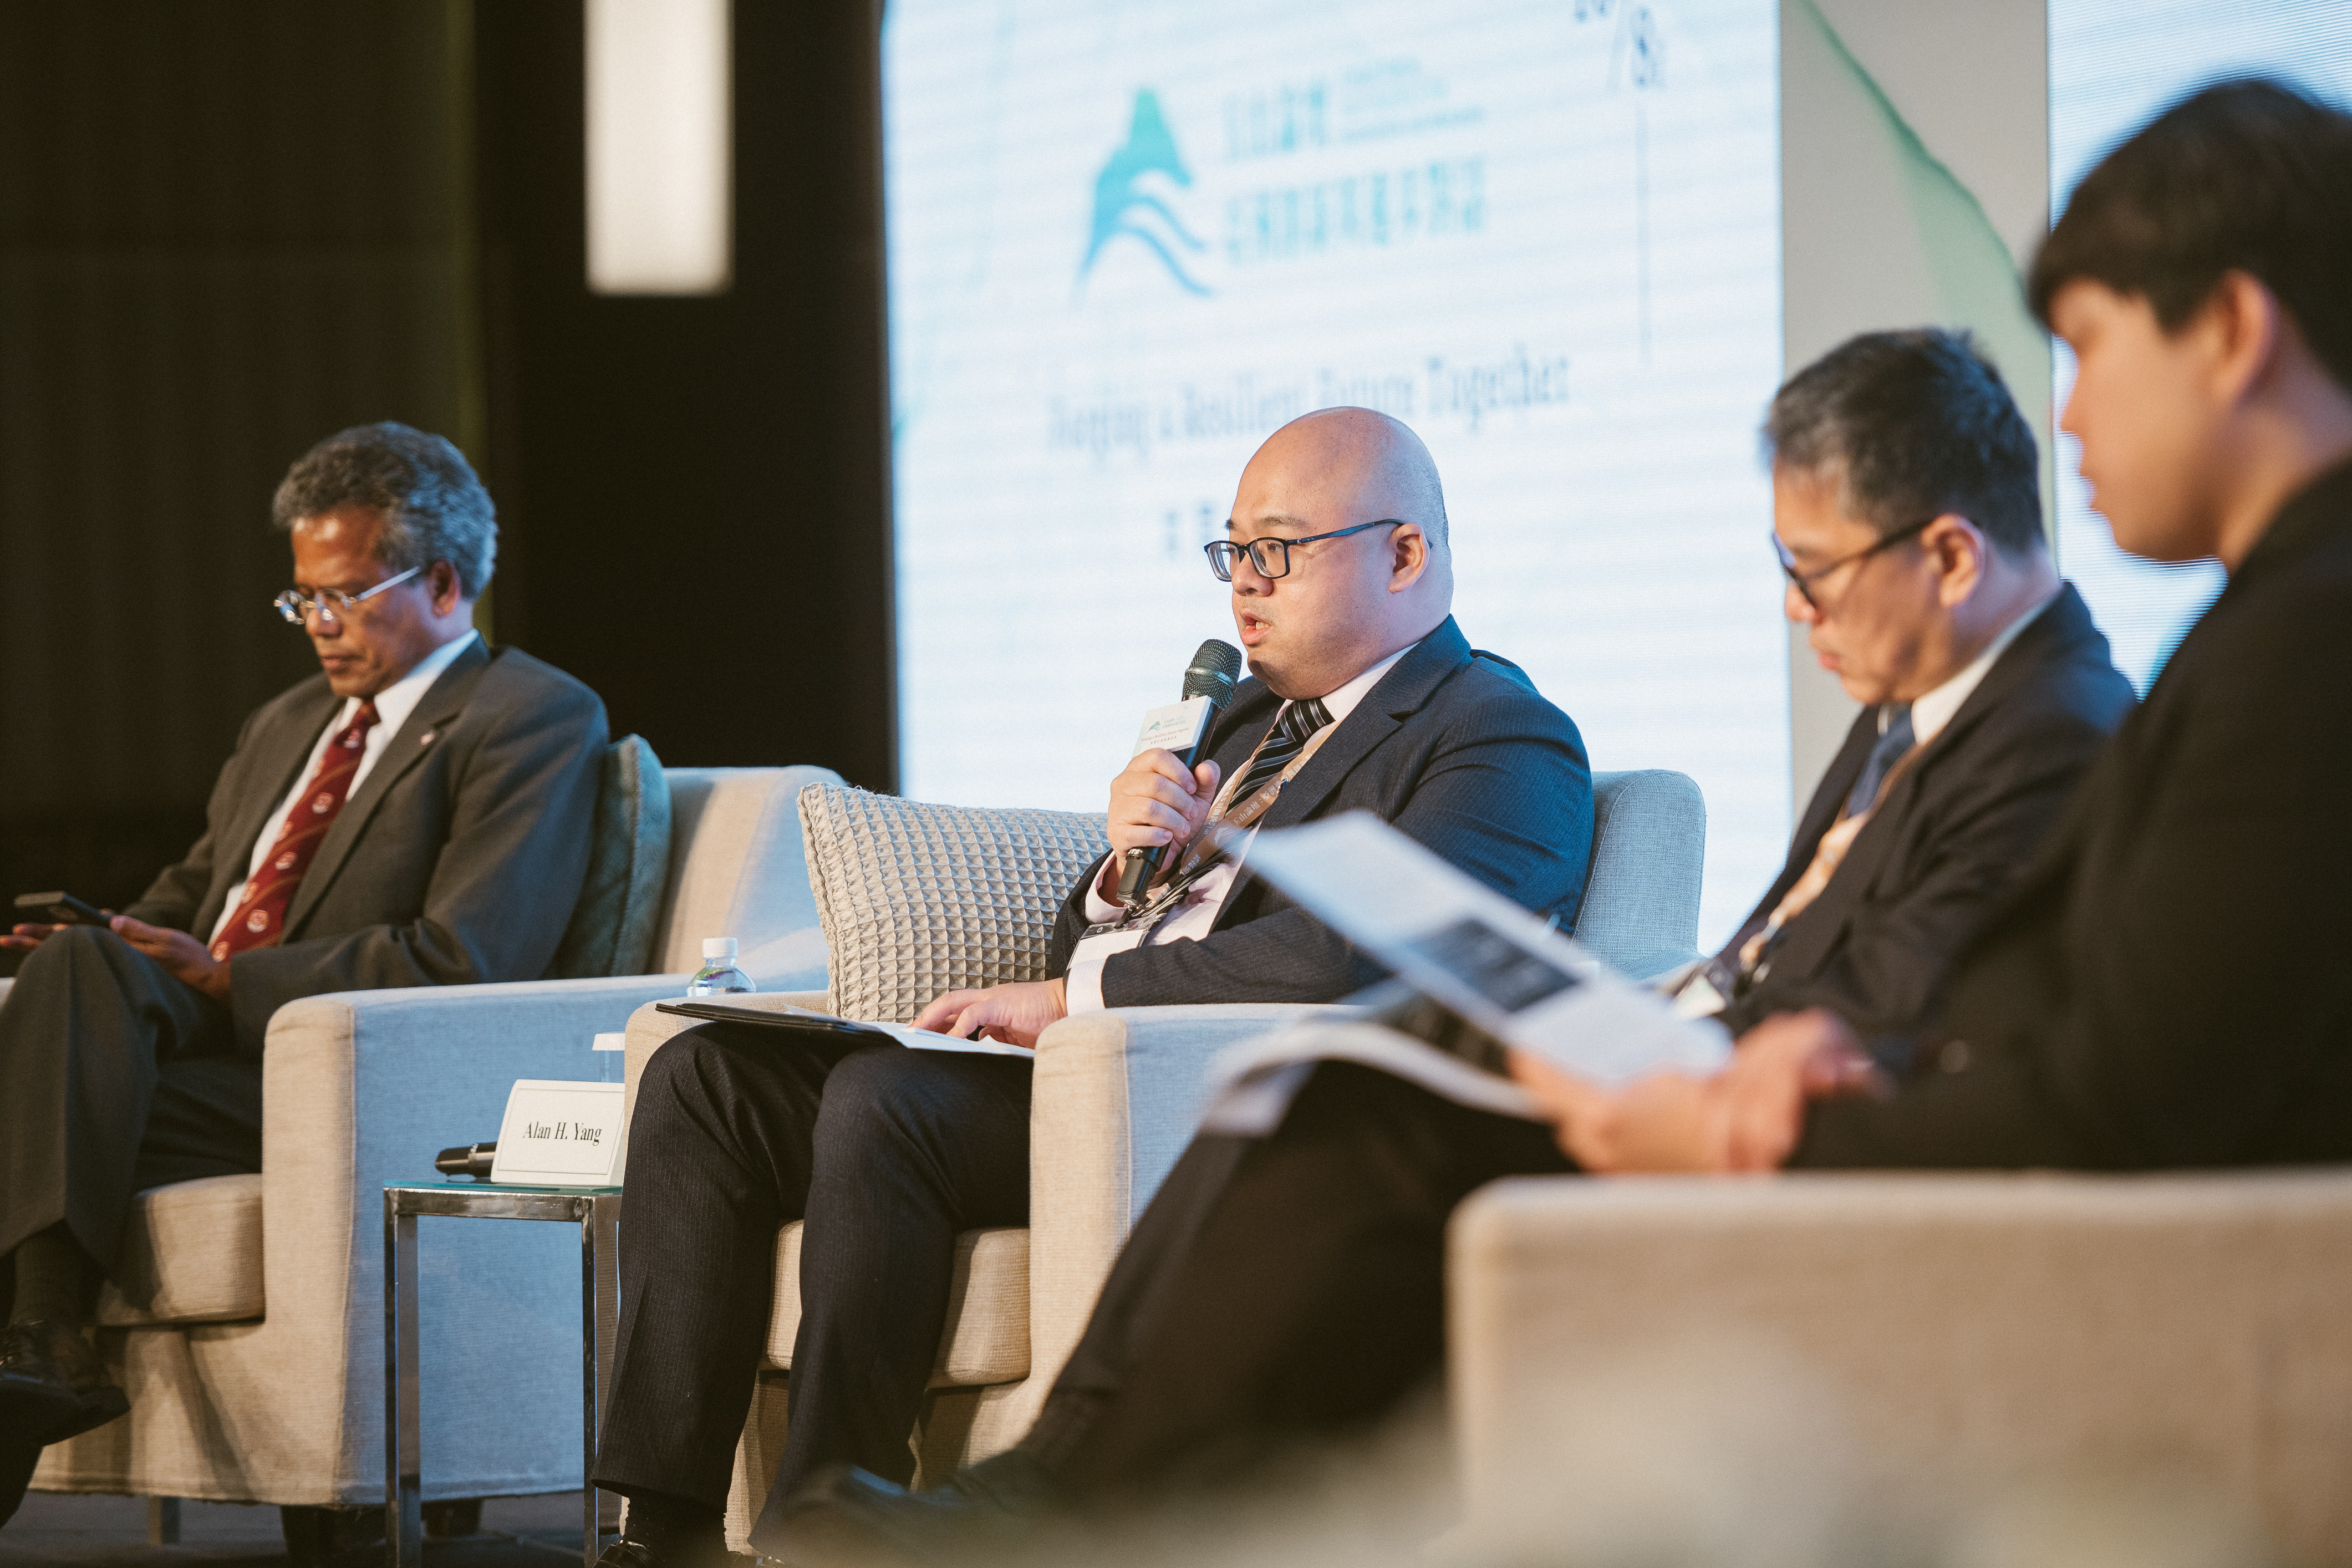 Alan H. Yang, the Executive Director of TAEF, as the moderator of the session